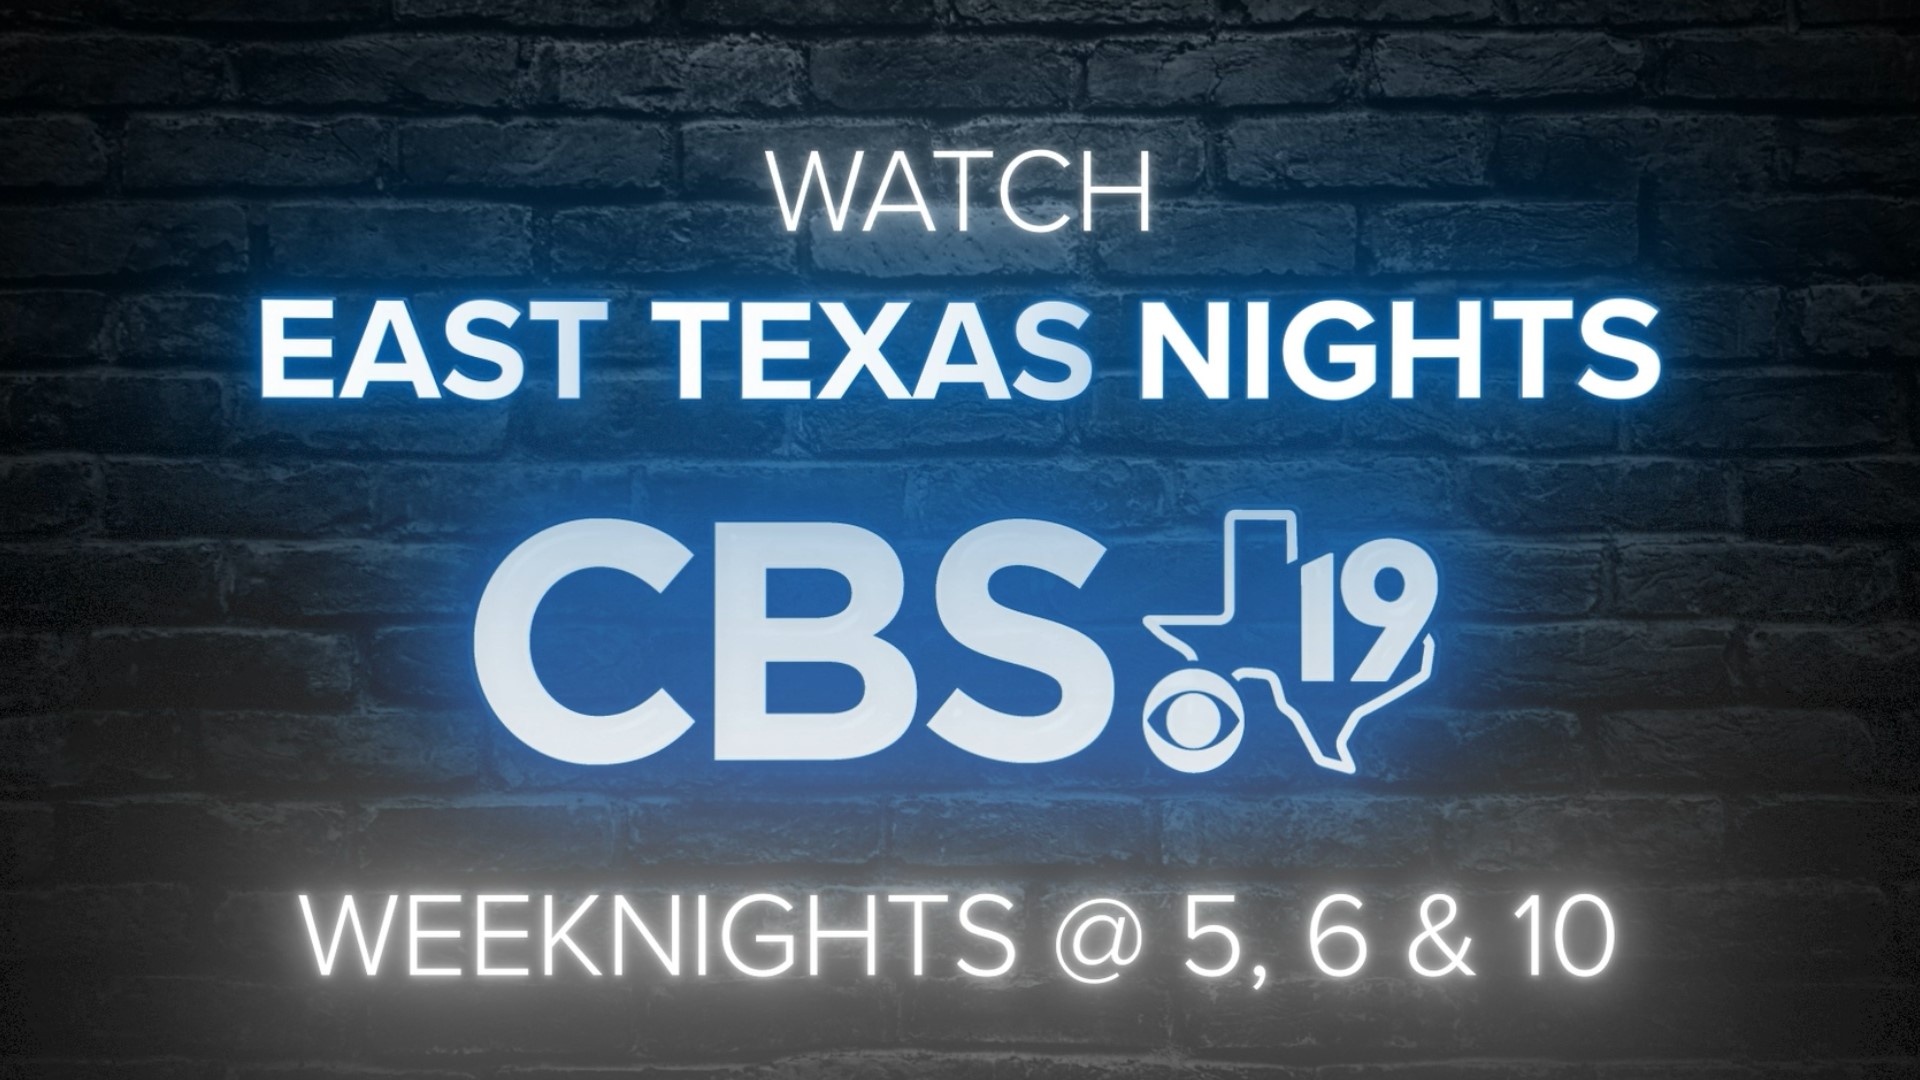 CBS19 teamed up with the East Texas Writers Guild and Whiskey Myers to explain what being an East Texas truly means.